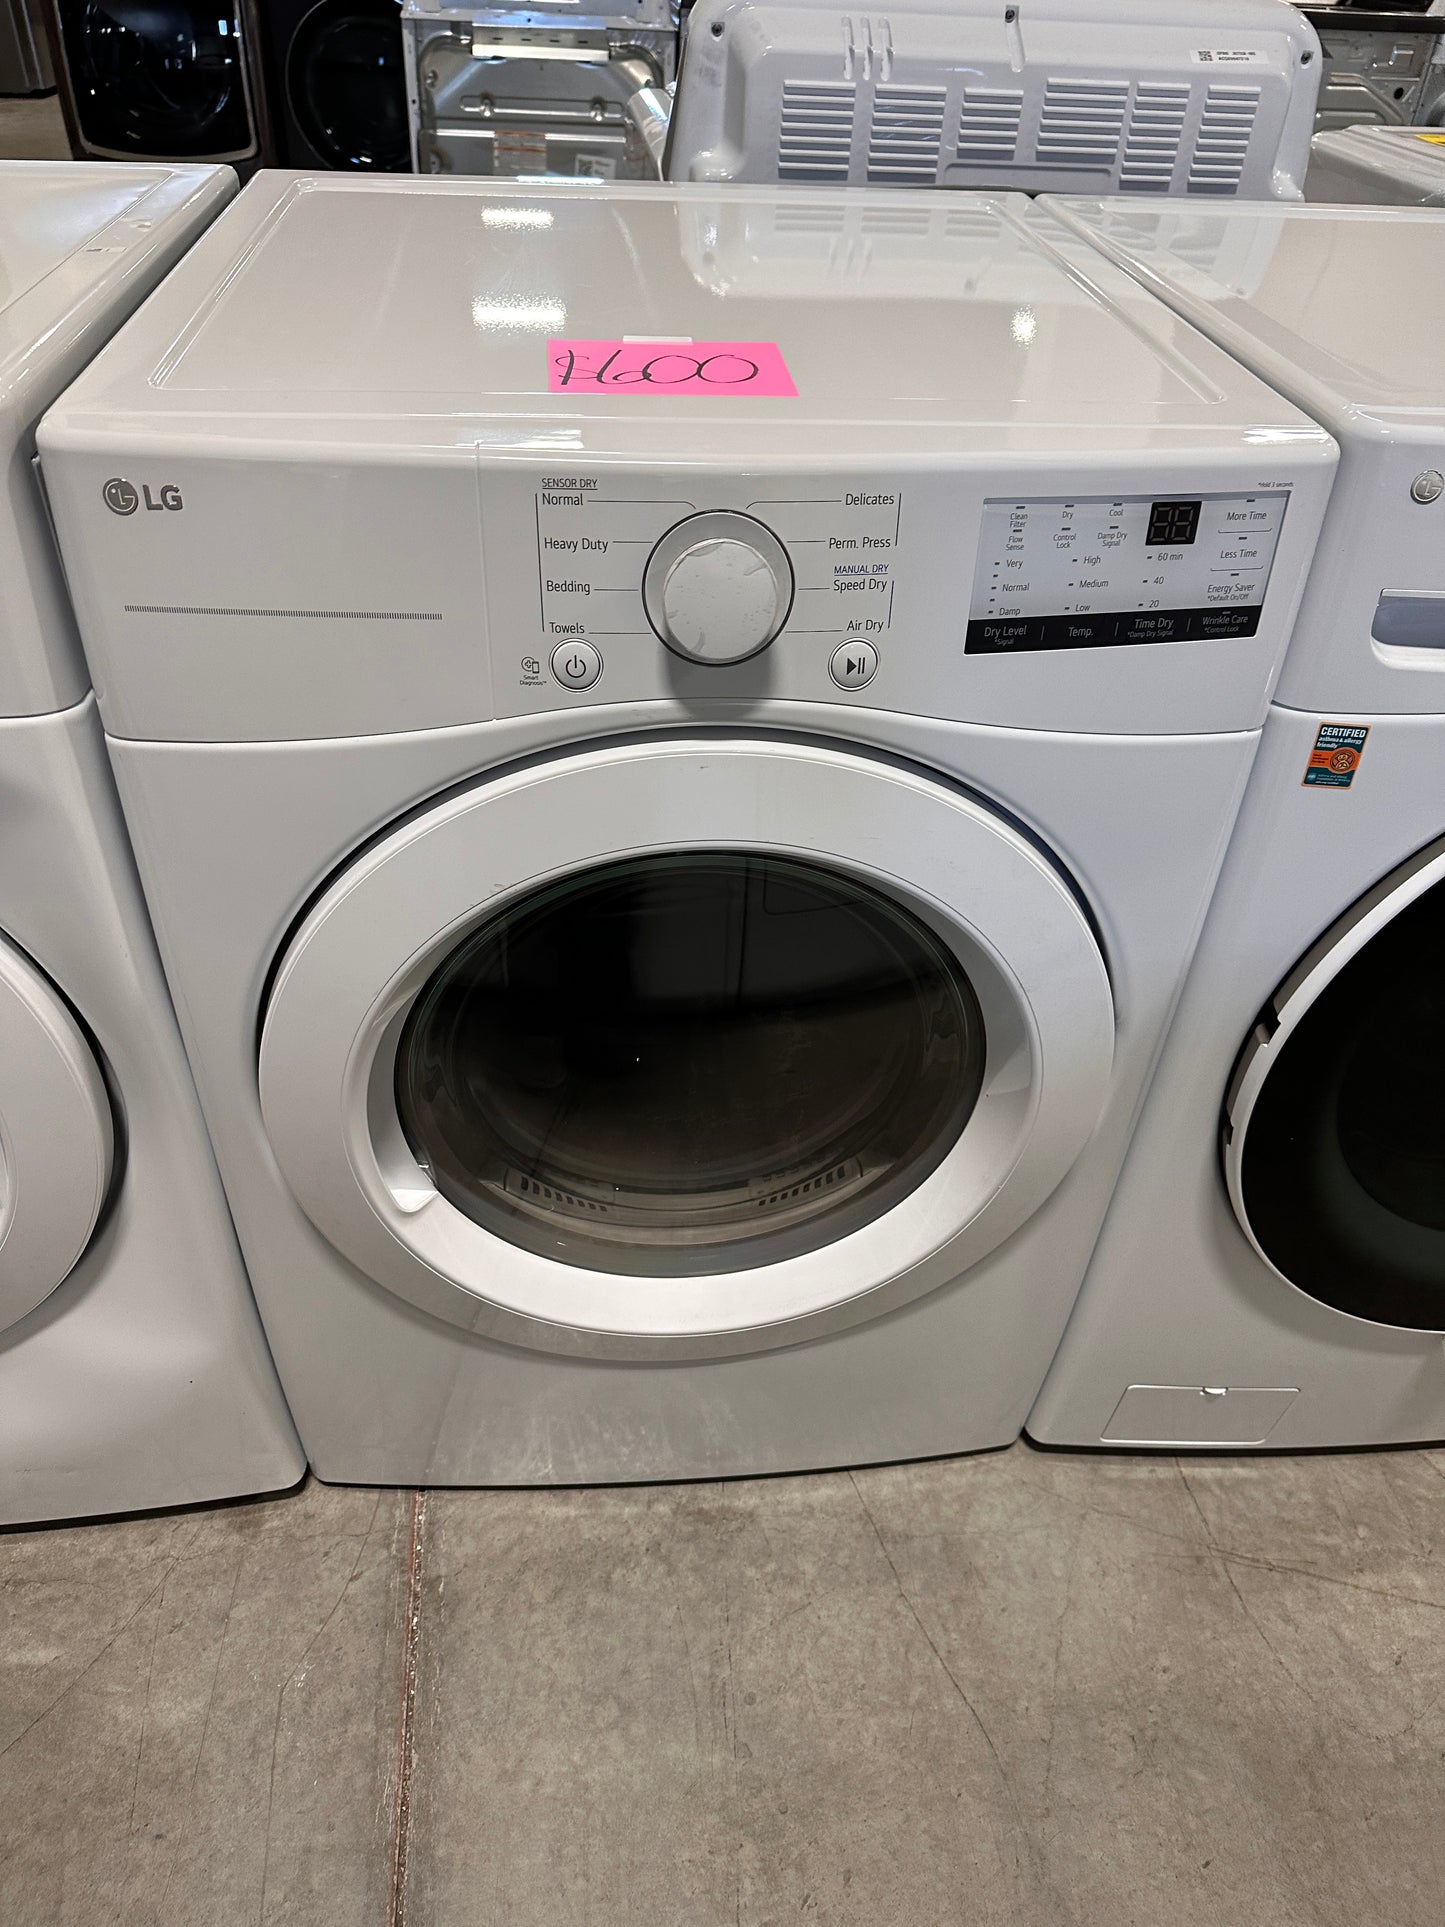 NEW LG ELECTRIC DRYER WITH FLOWSENSE - DRY12245